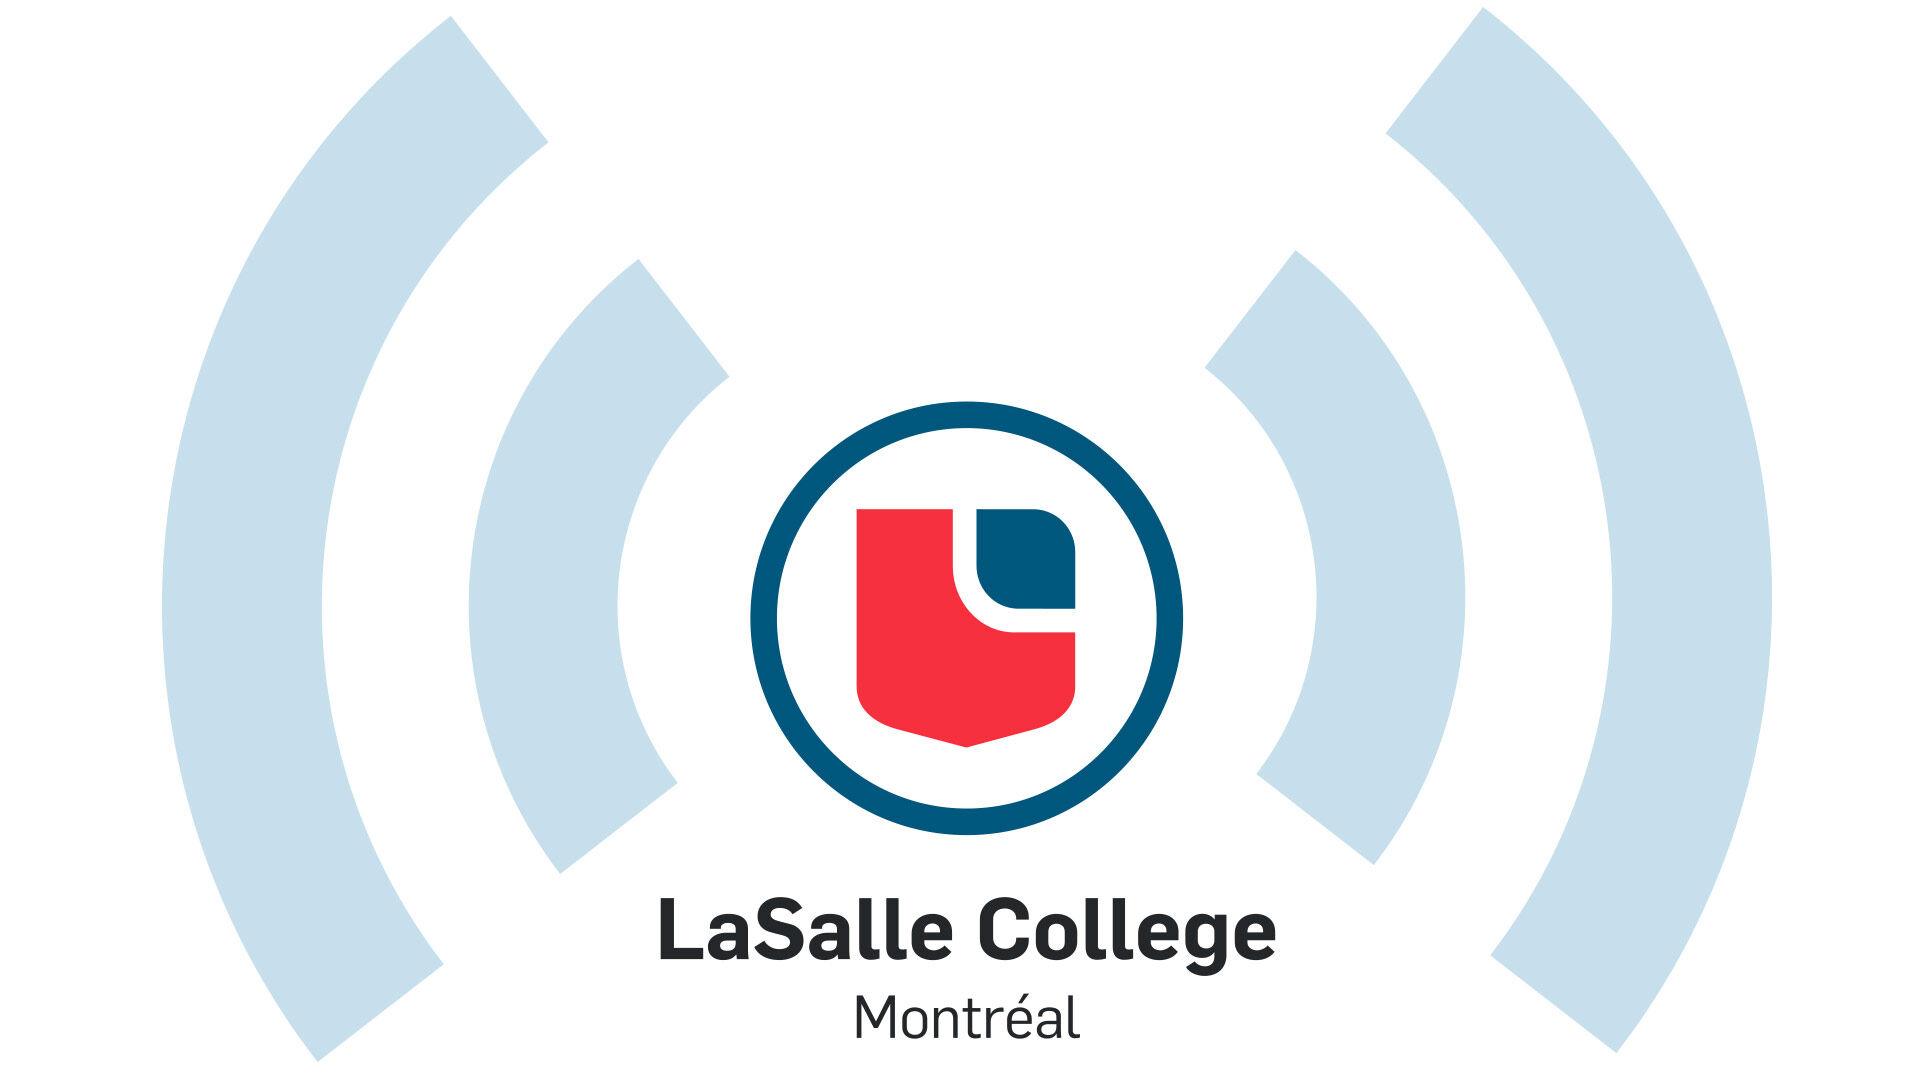 Logo of LaSalle College Montreal, featuring a stylized 'L' in red and blue within a circle, flanked by curved lines.